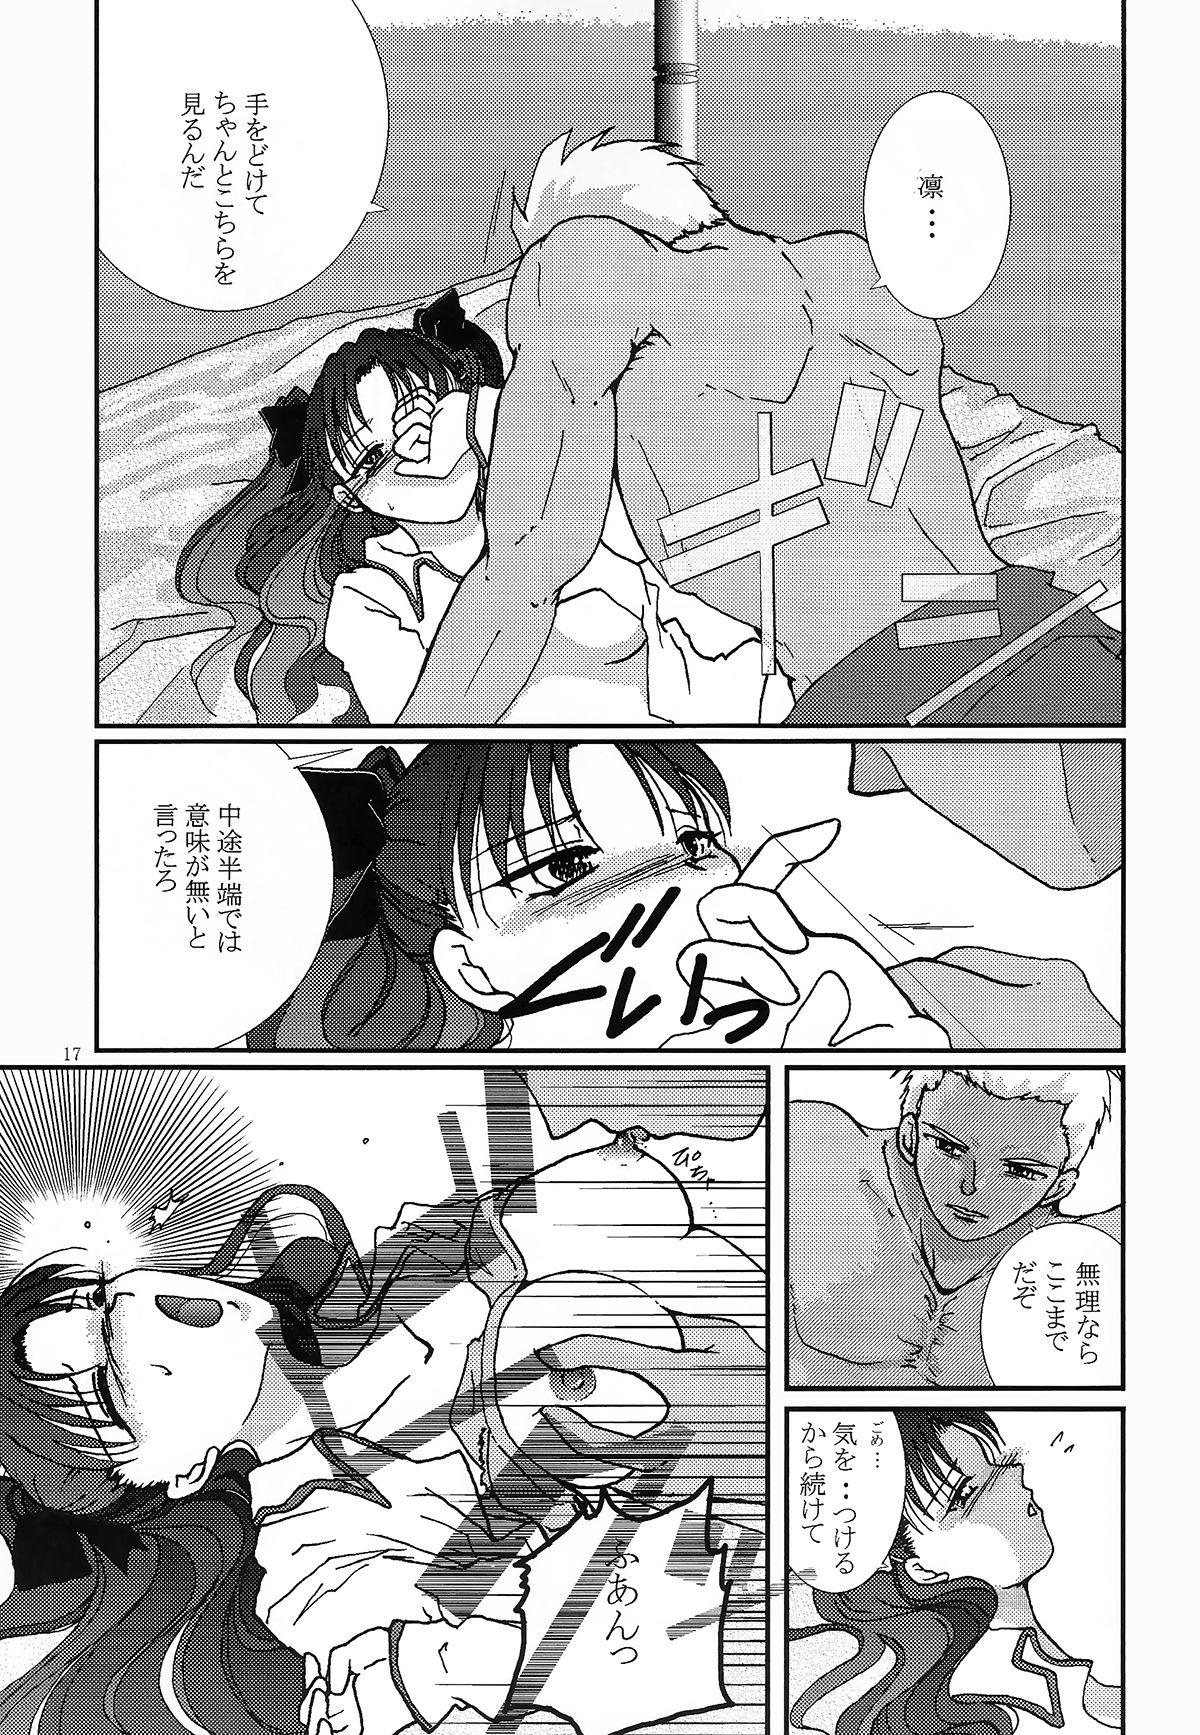 (SC24) [Takeda Syouten (Takeda Sora)] Question-7 (Fate/stay night) page 15 full